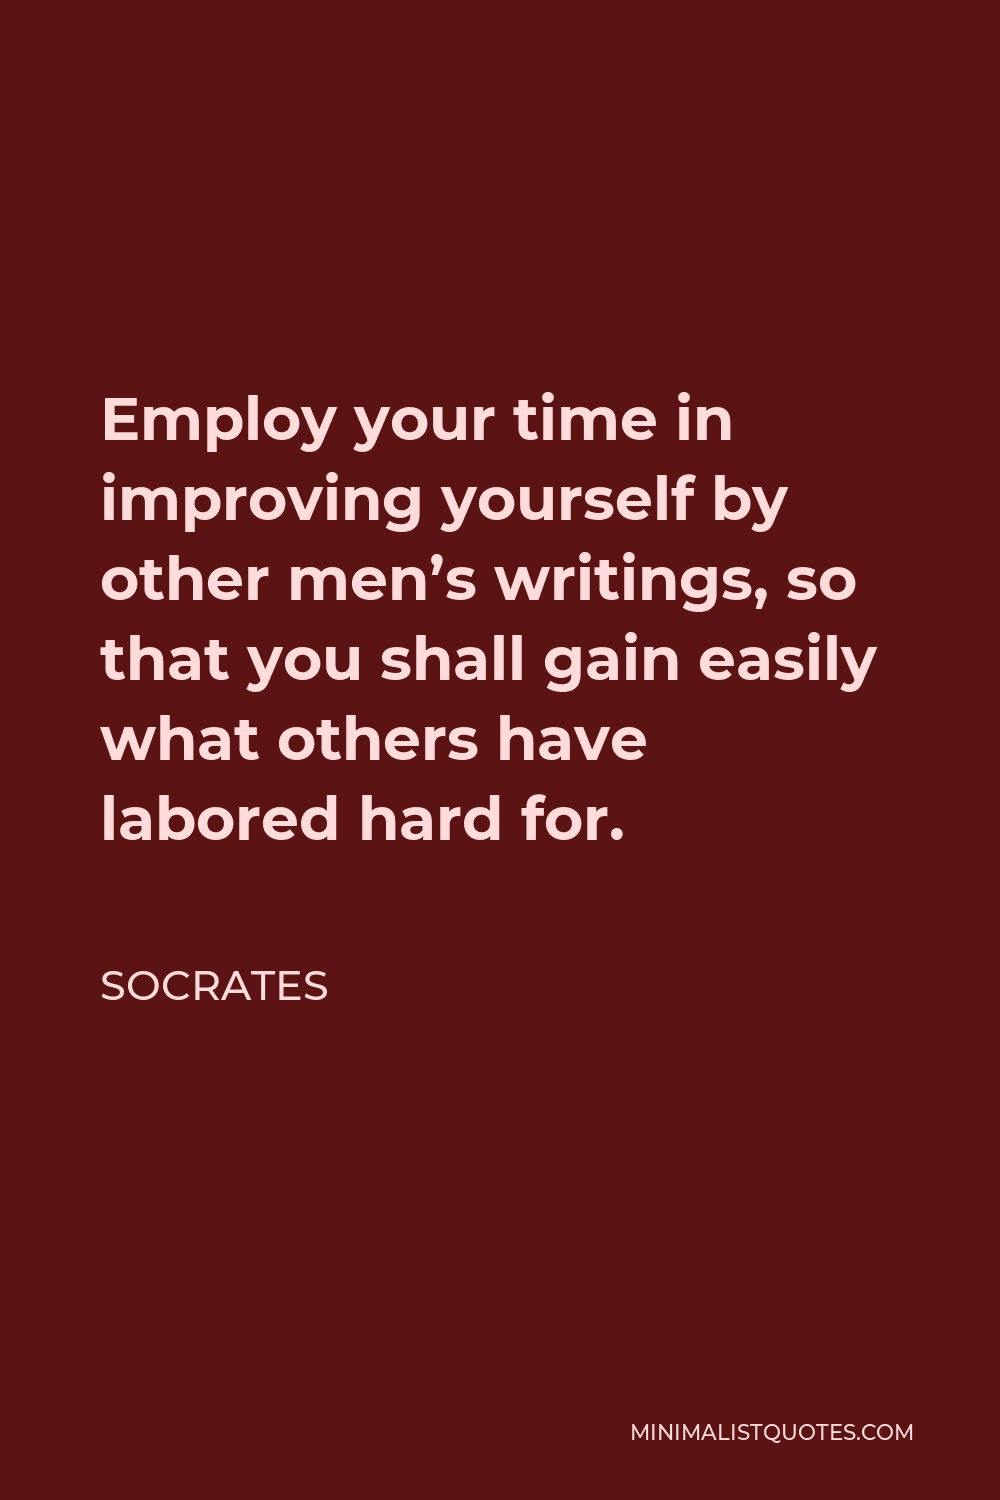 Socrates Quote - Employ your time in improving yourself by other men’s writings so that you shall come easily by what others have labored hard for.